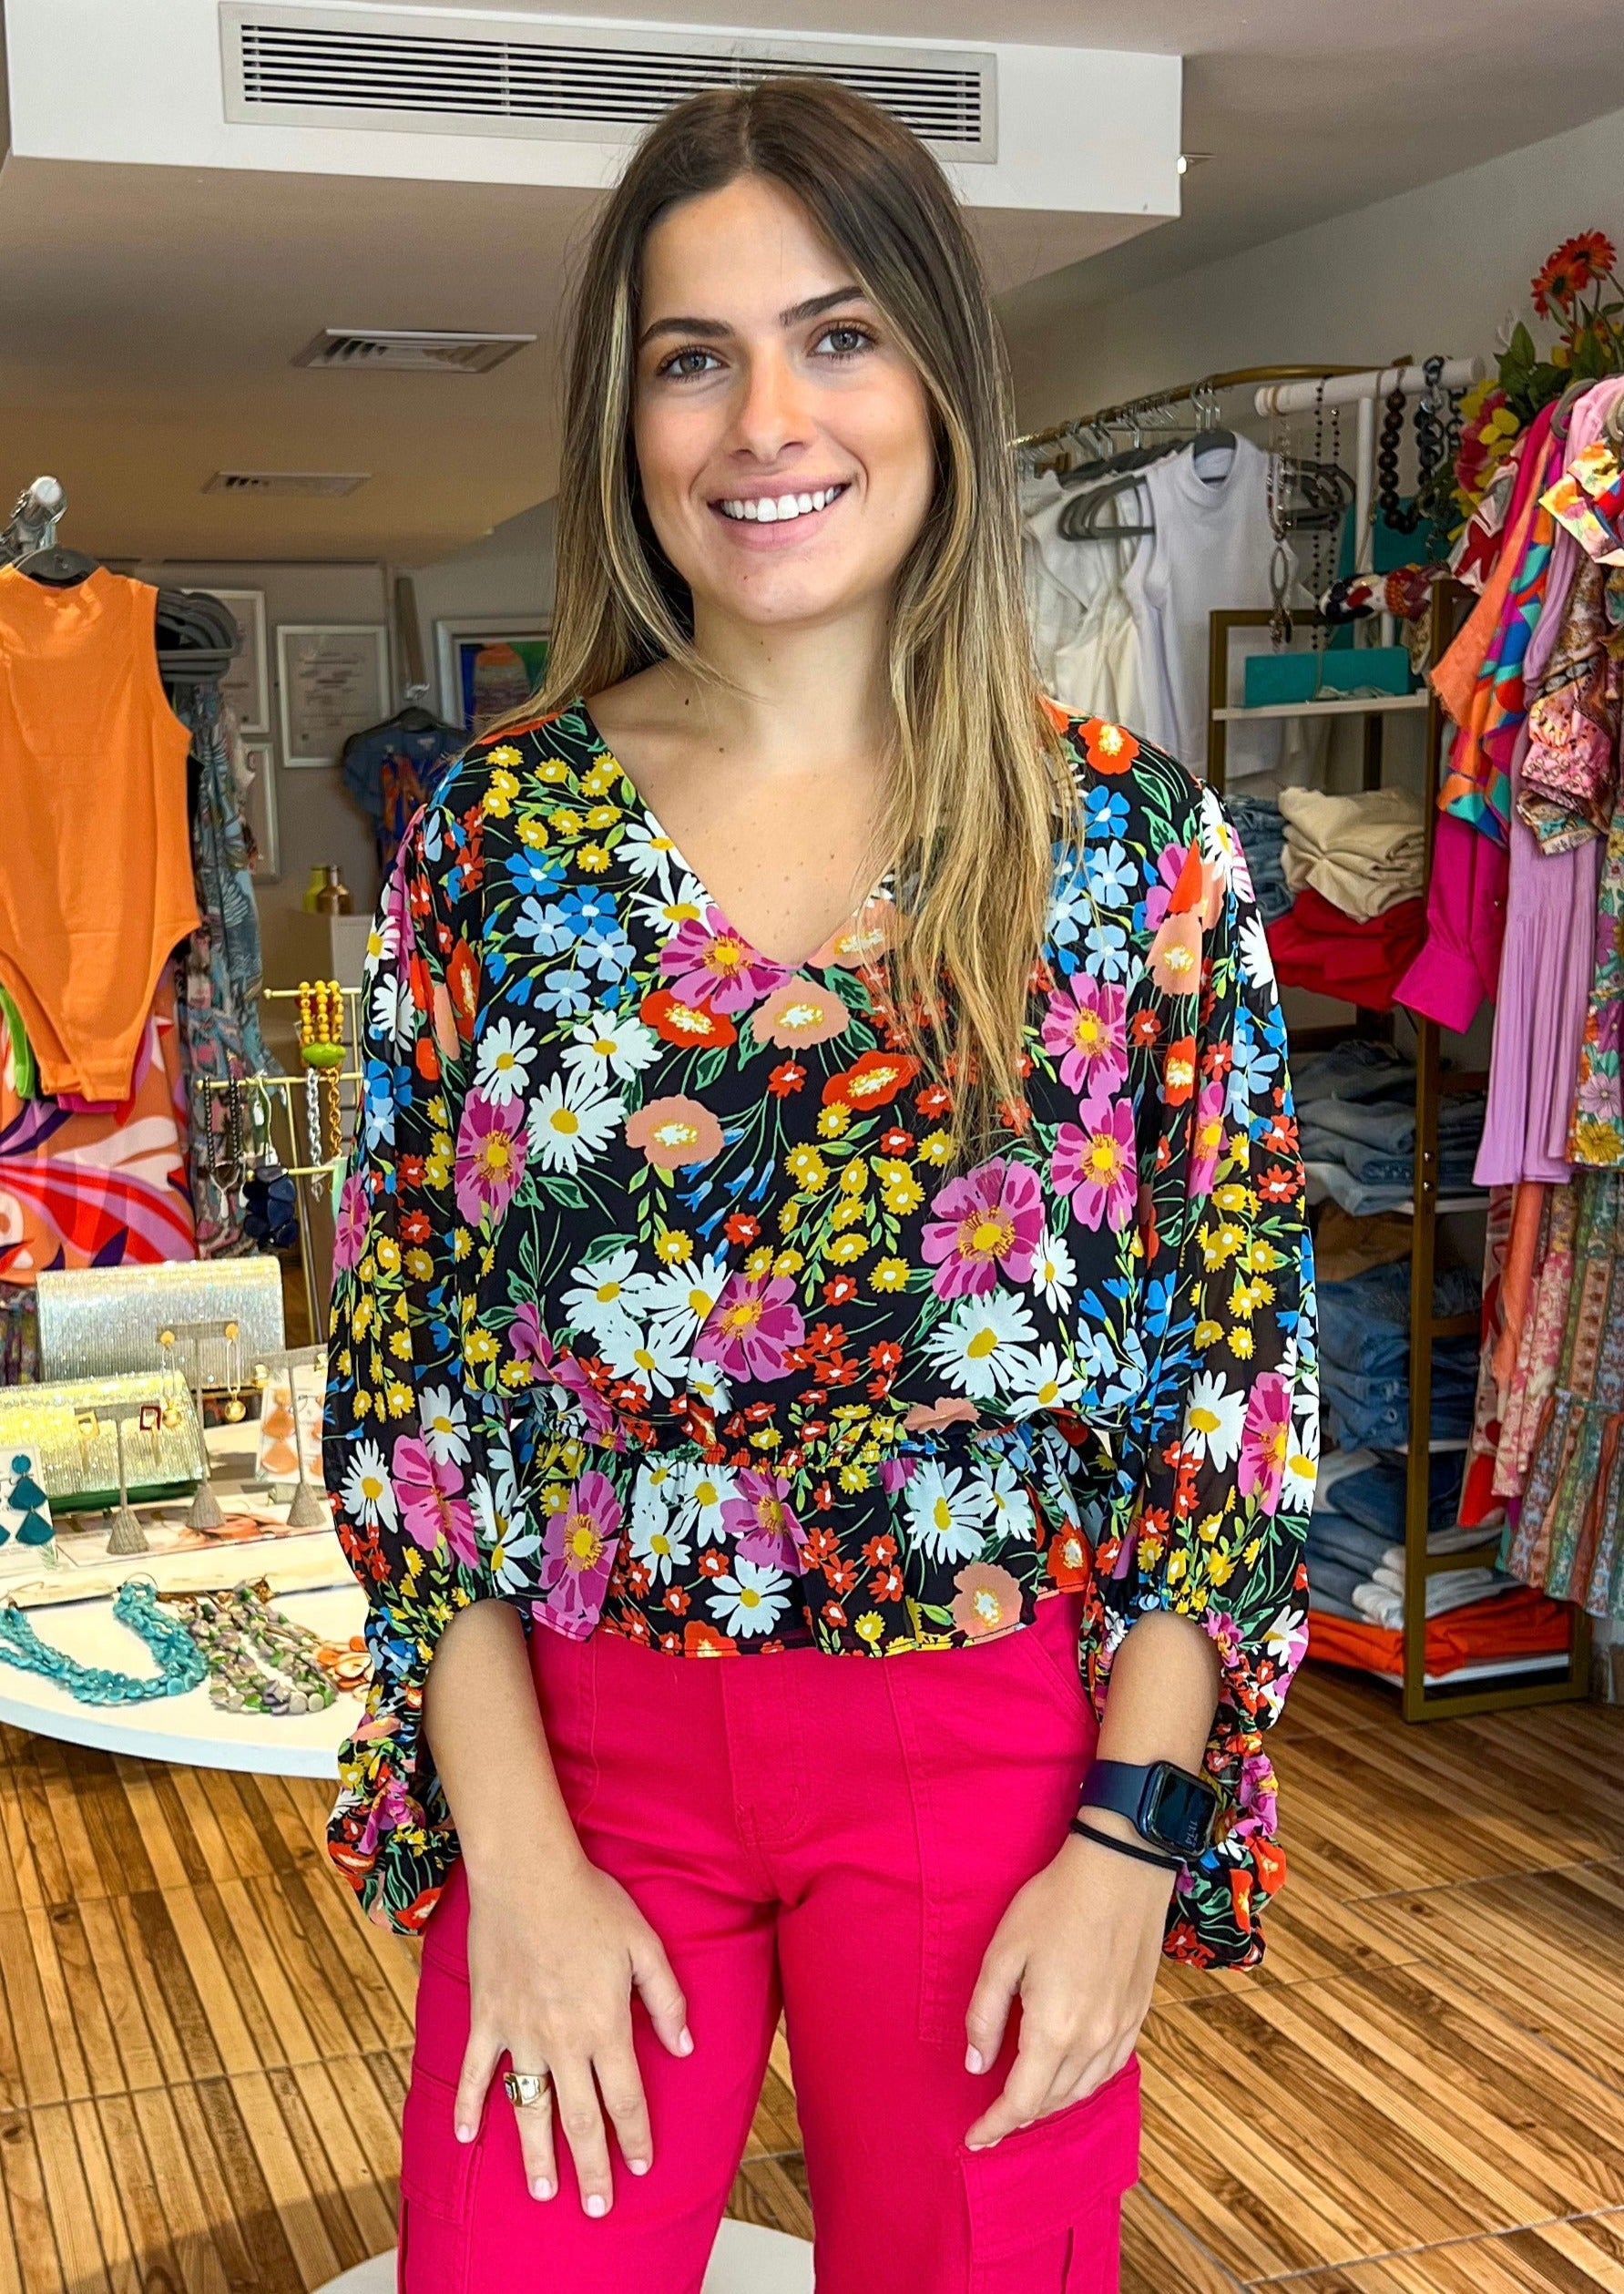 Beautiful and bold, the Lupita Floral print consists of various multicolored flowers against a blackground. The print shapes the evergreen blouse with roomy full sleeves and a shallow V neckline. The bodice maintains a relaxed fit with an elastic waist to create a peplum silhouette. Wear it to work or out to brunch along with black trousers and cute strappy heels.